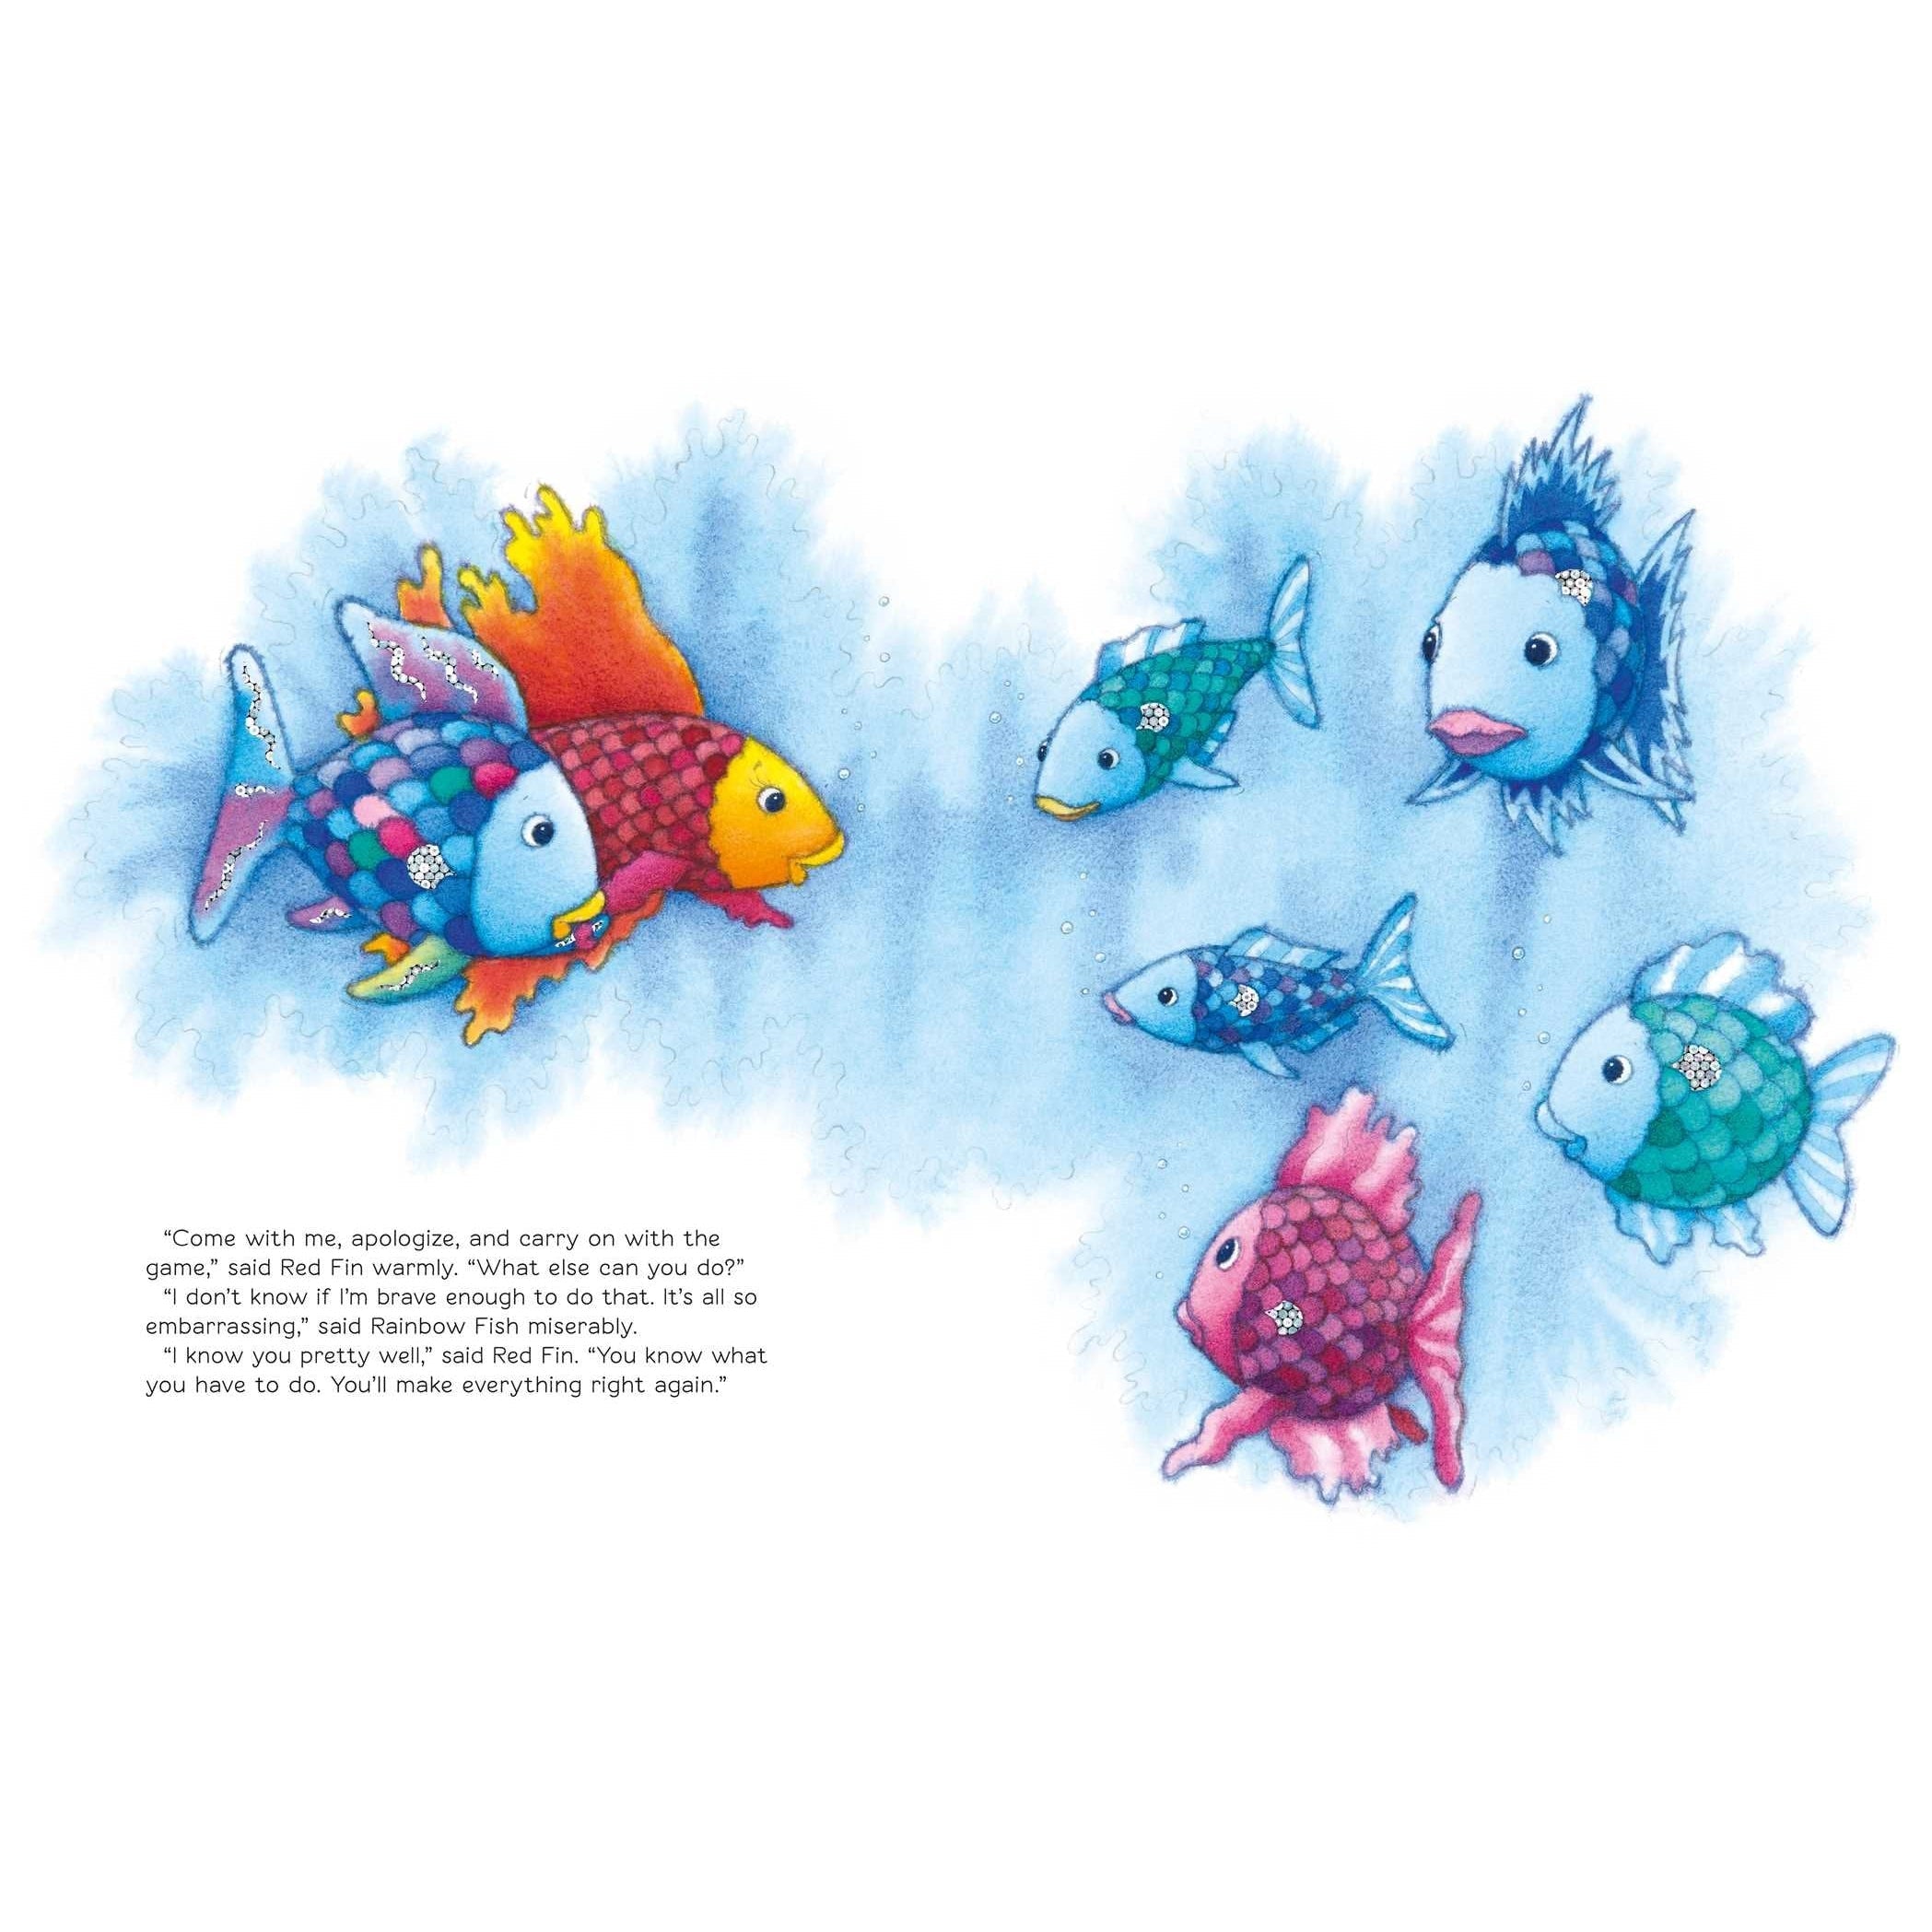 You Can't Win Them All, Rainbow Fish [Book]